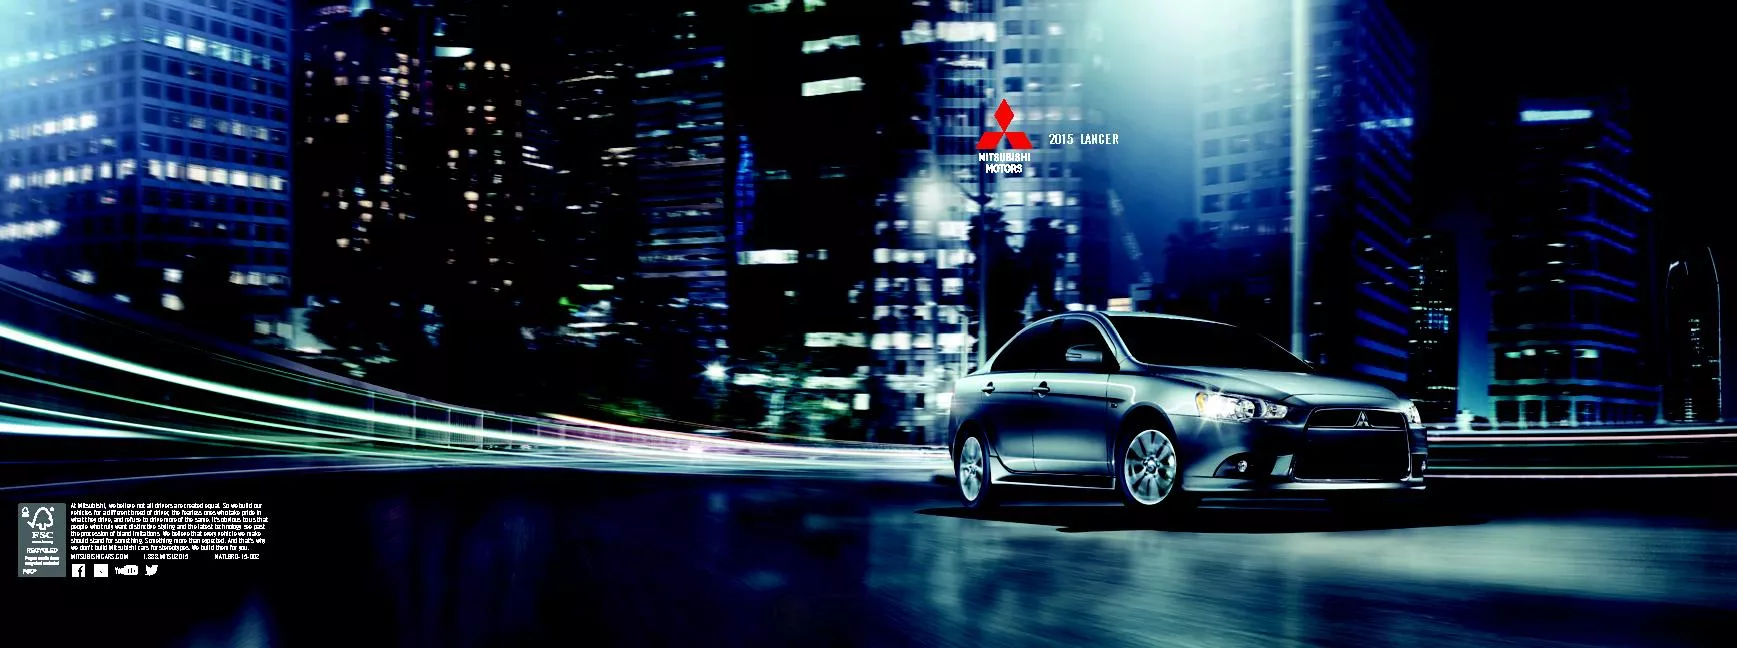 At Mitsubishi, we believe not all drivers are created equal. So we bui